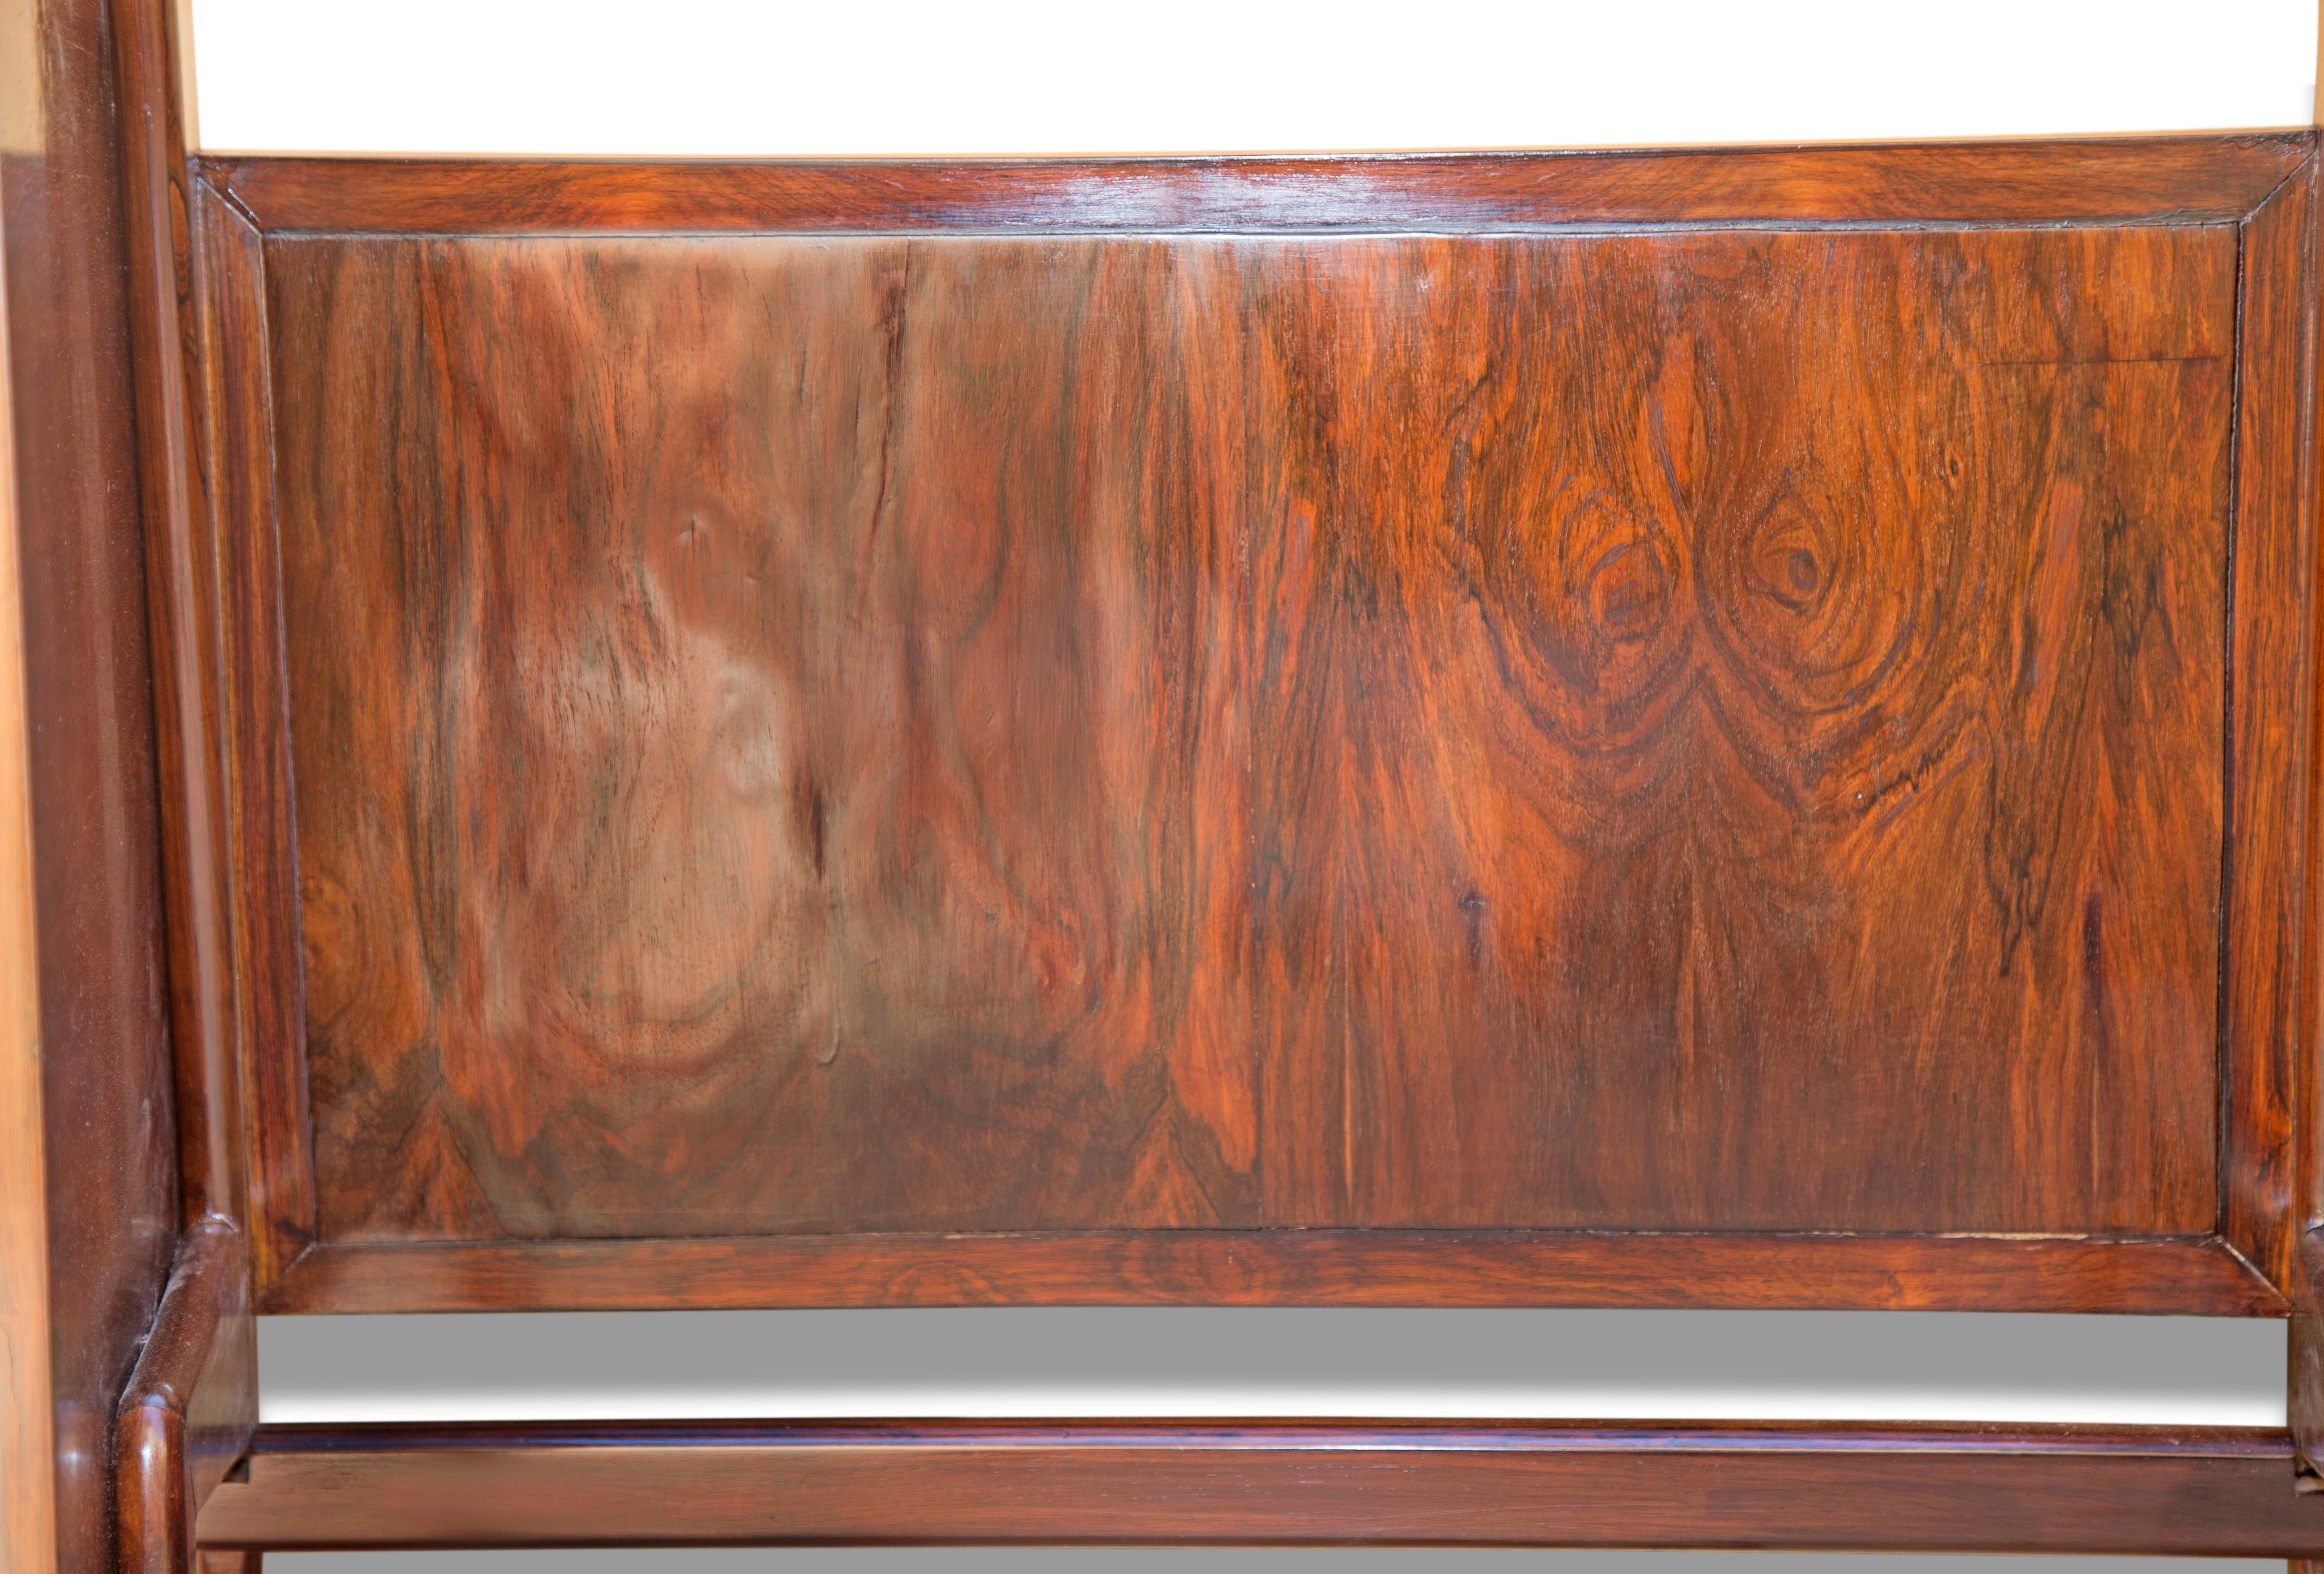 Brazilian Modern Hand Painted Bar in Hardwood by G. Scapinelli, 1950s, Brazil For Sale 1